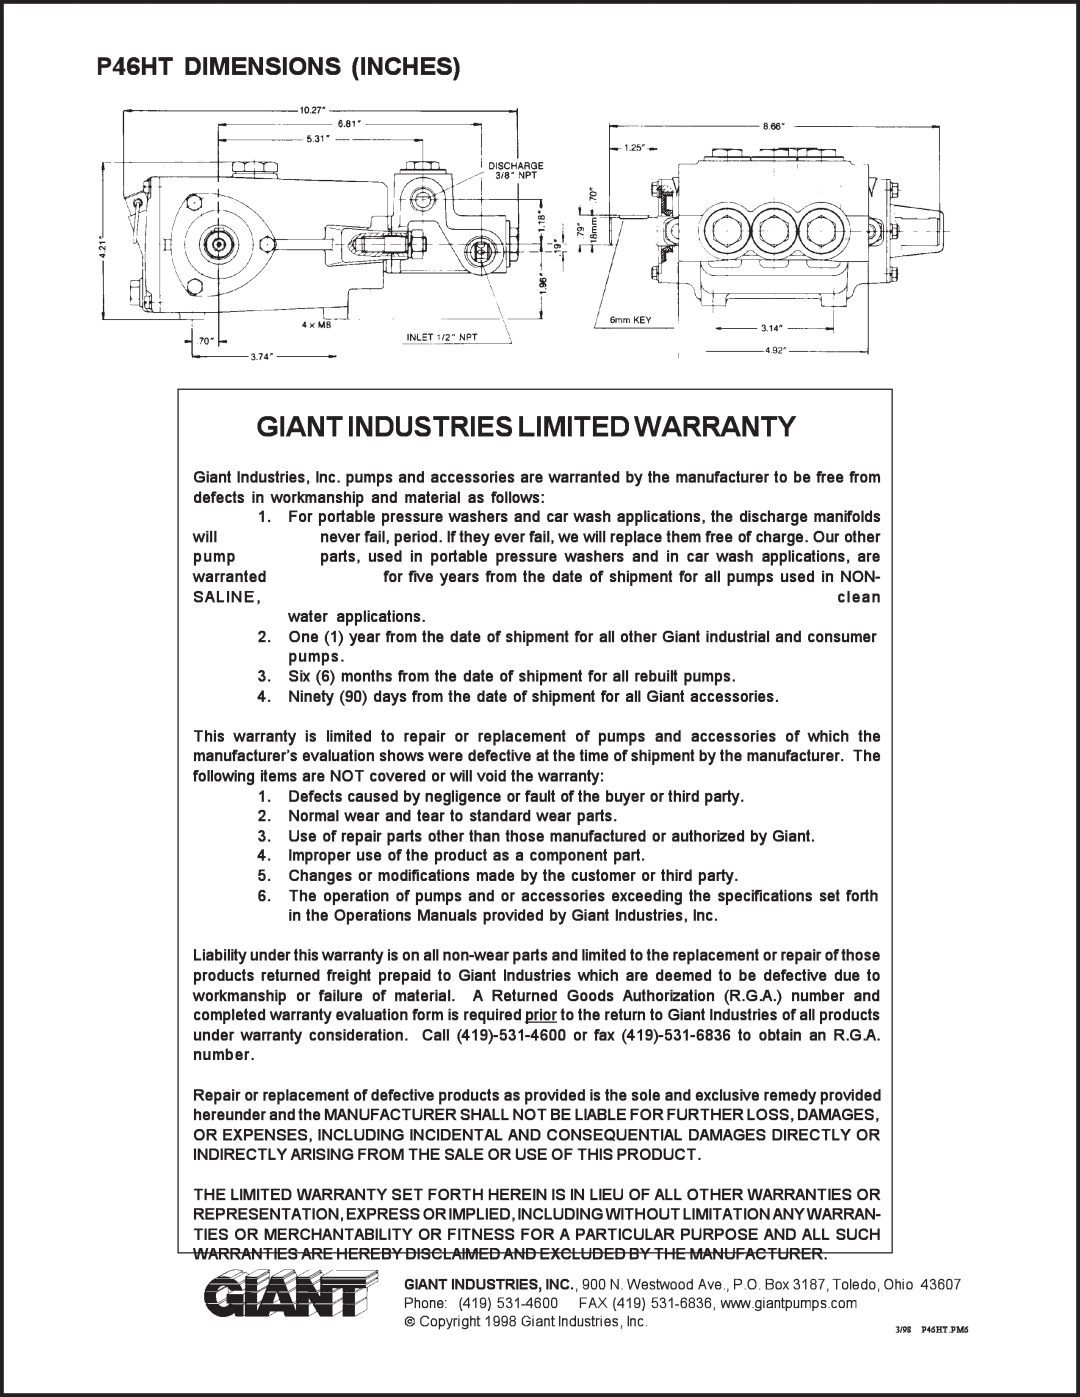 Giant installation instructions Giant Industries Limited Warranty, P46HT DIMENSIONS INCHES 